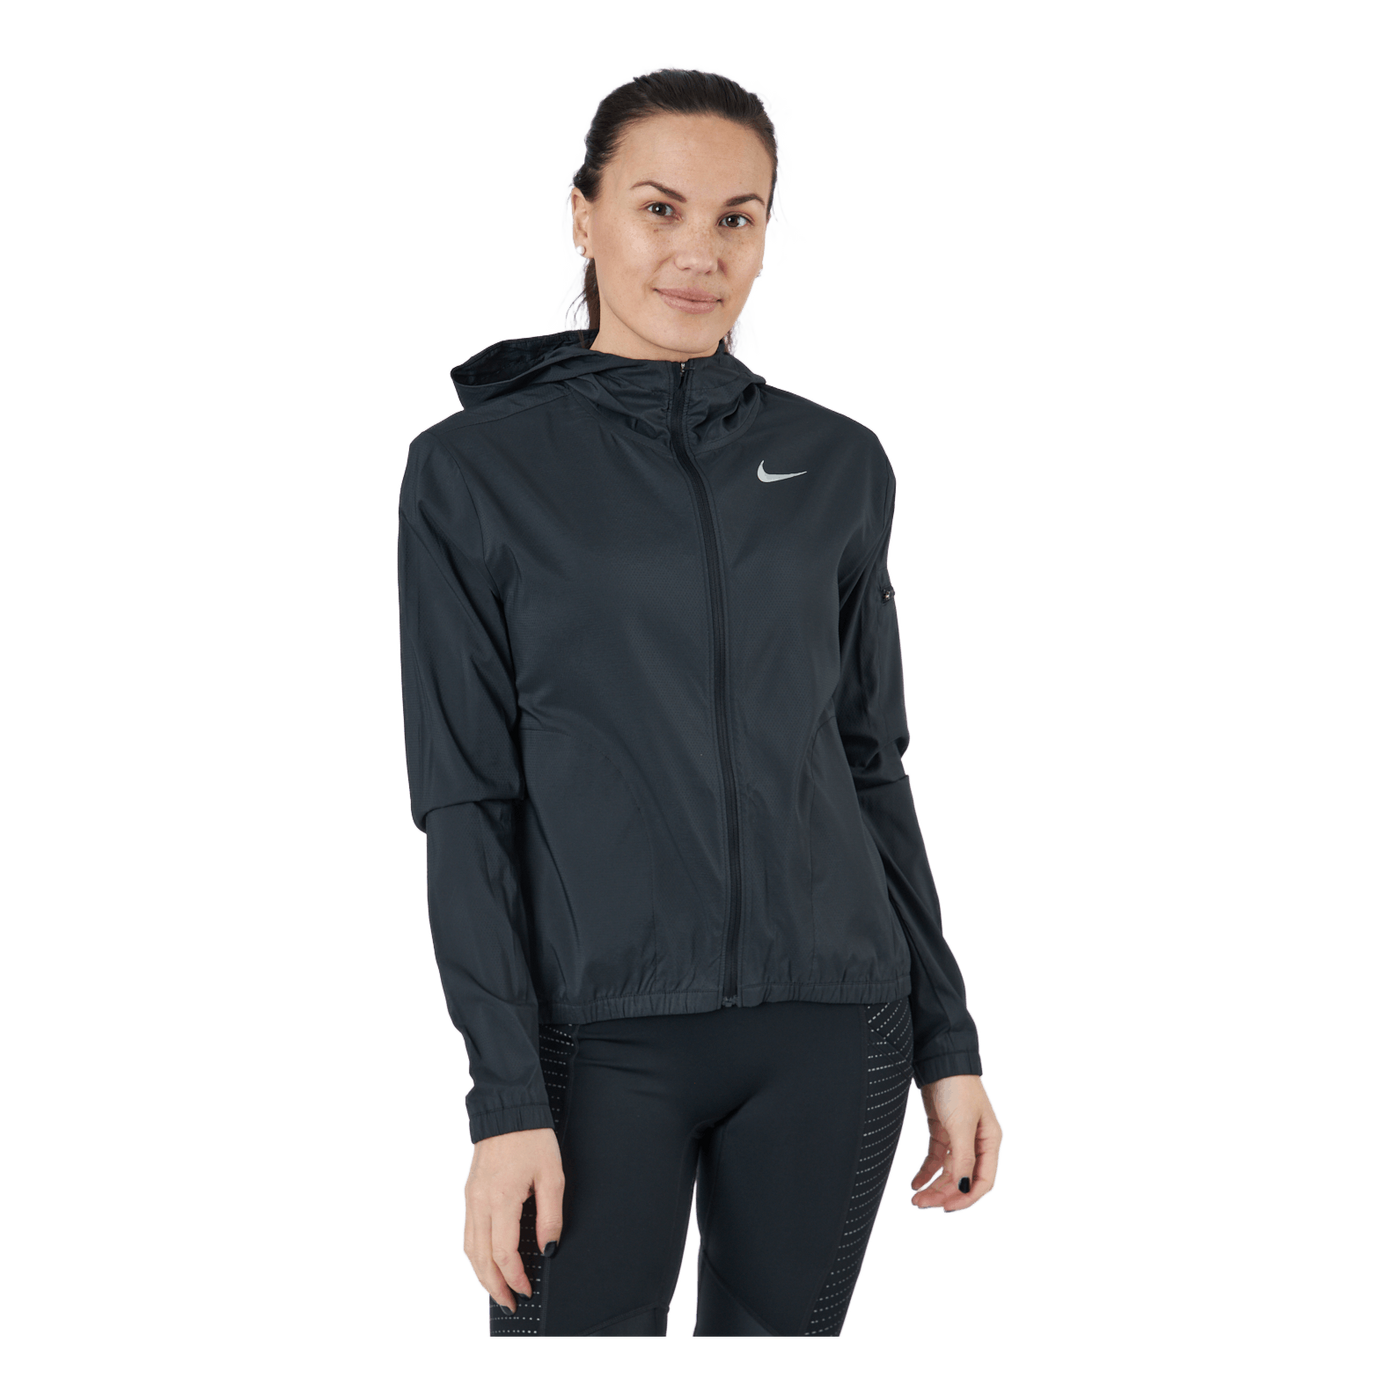 Impossibly Light Women's Hooded Running Jacket BLACK/REFLECTIVE SILV